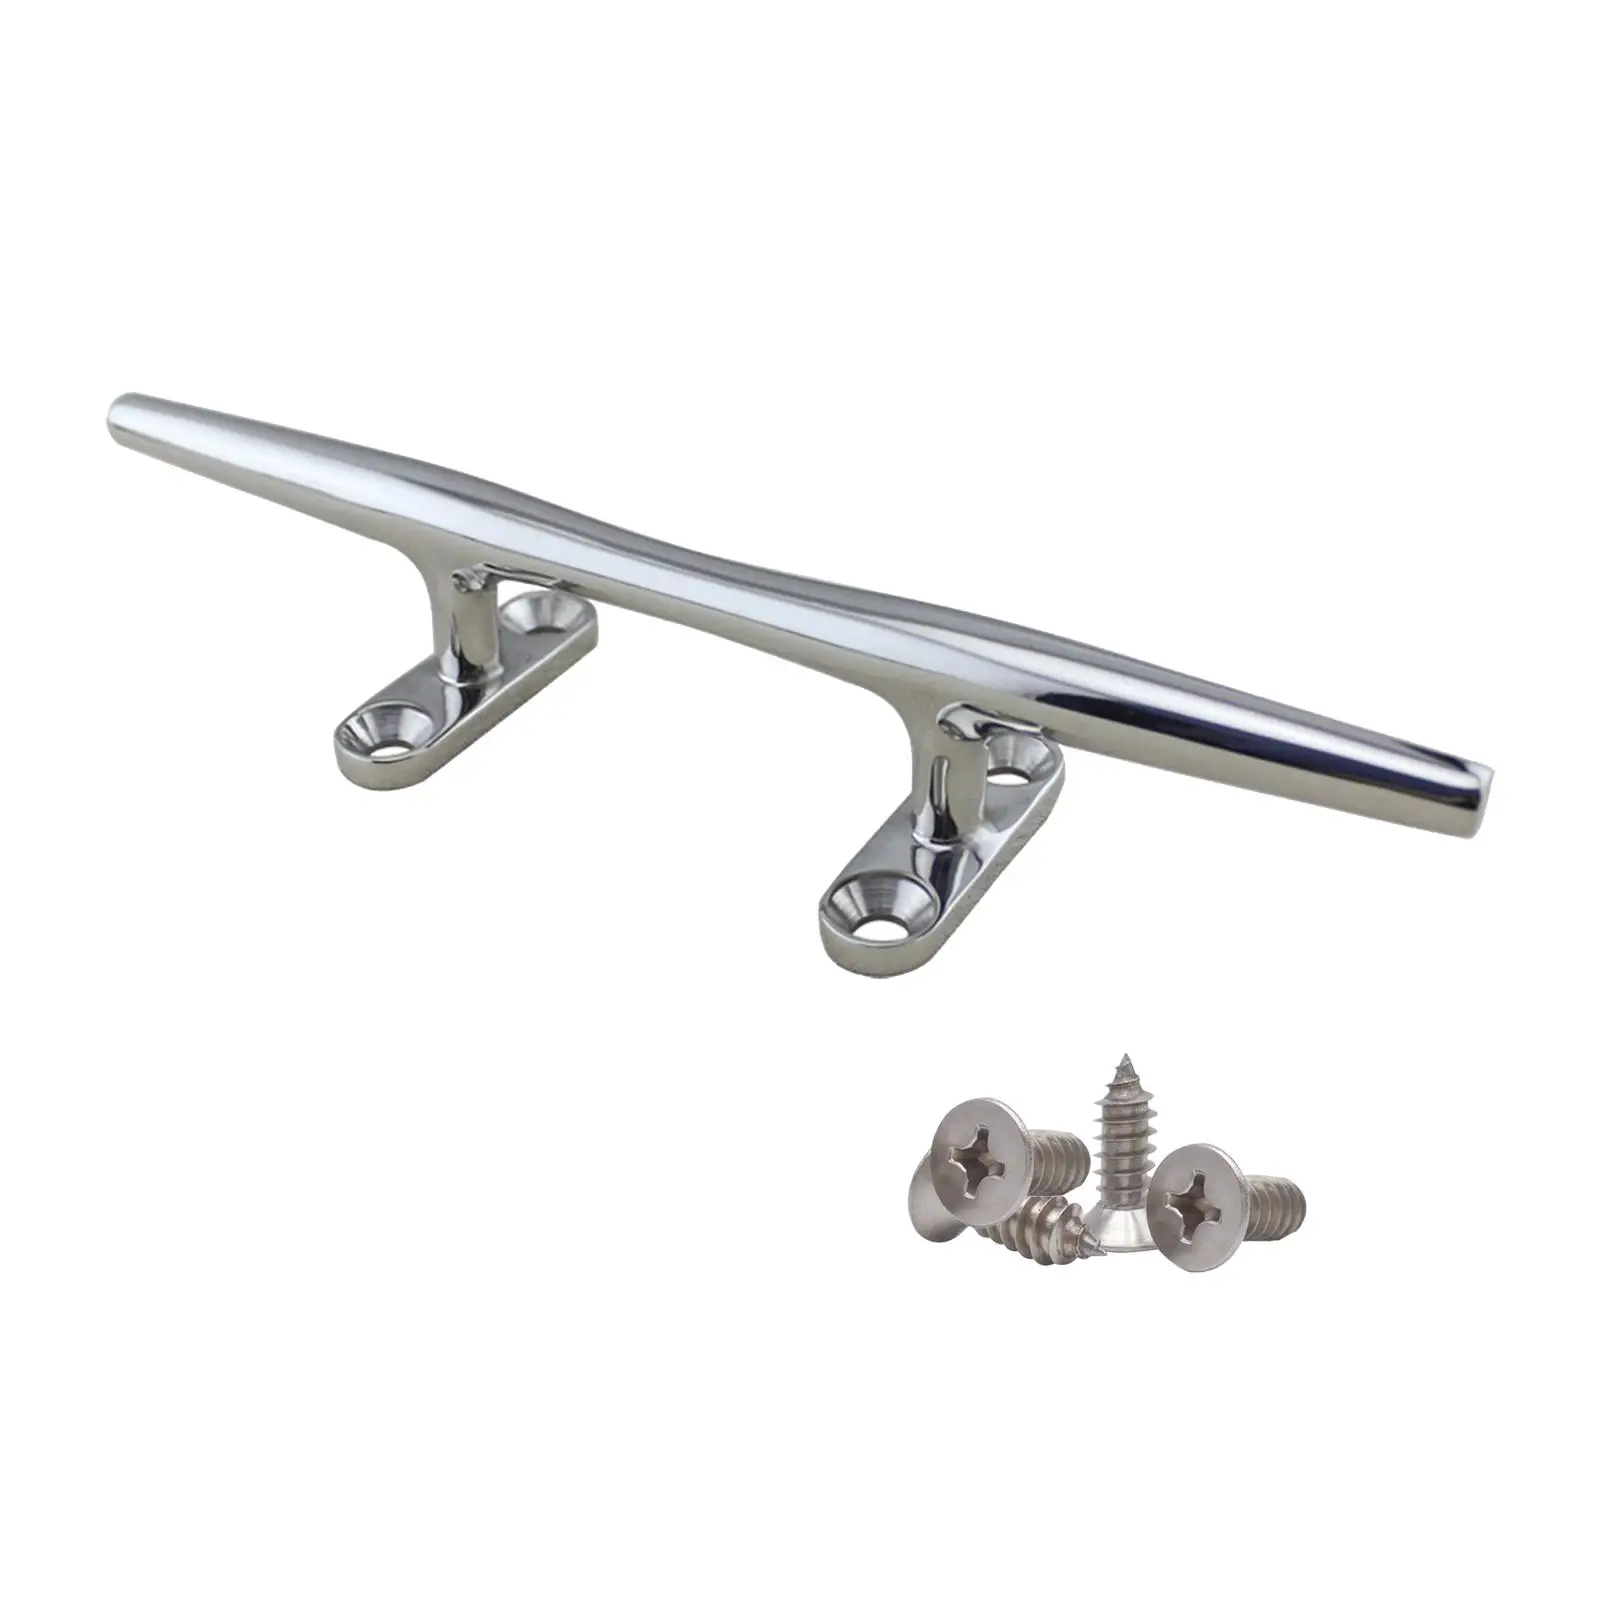 Boat Dock Cleat Professional Sturdy 316 Stainless Steel Open Base Deck Cleat